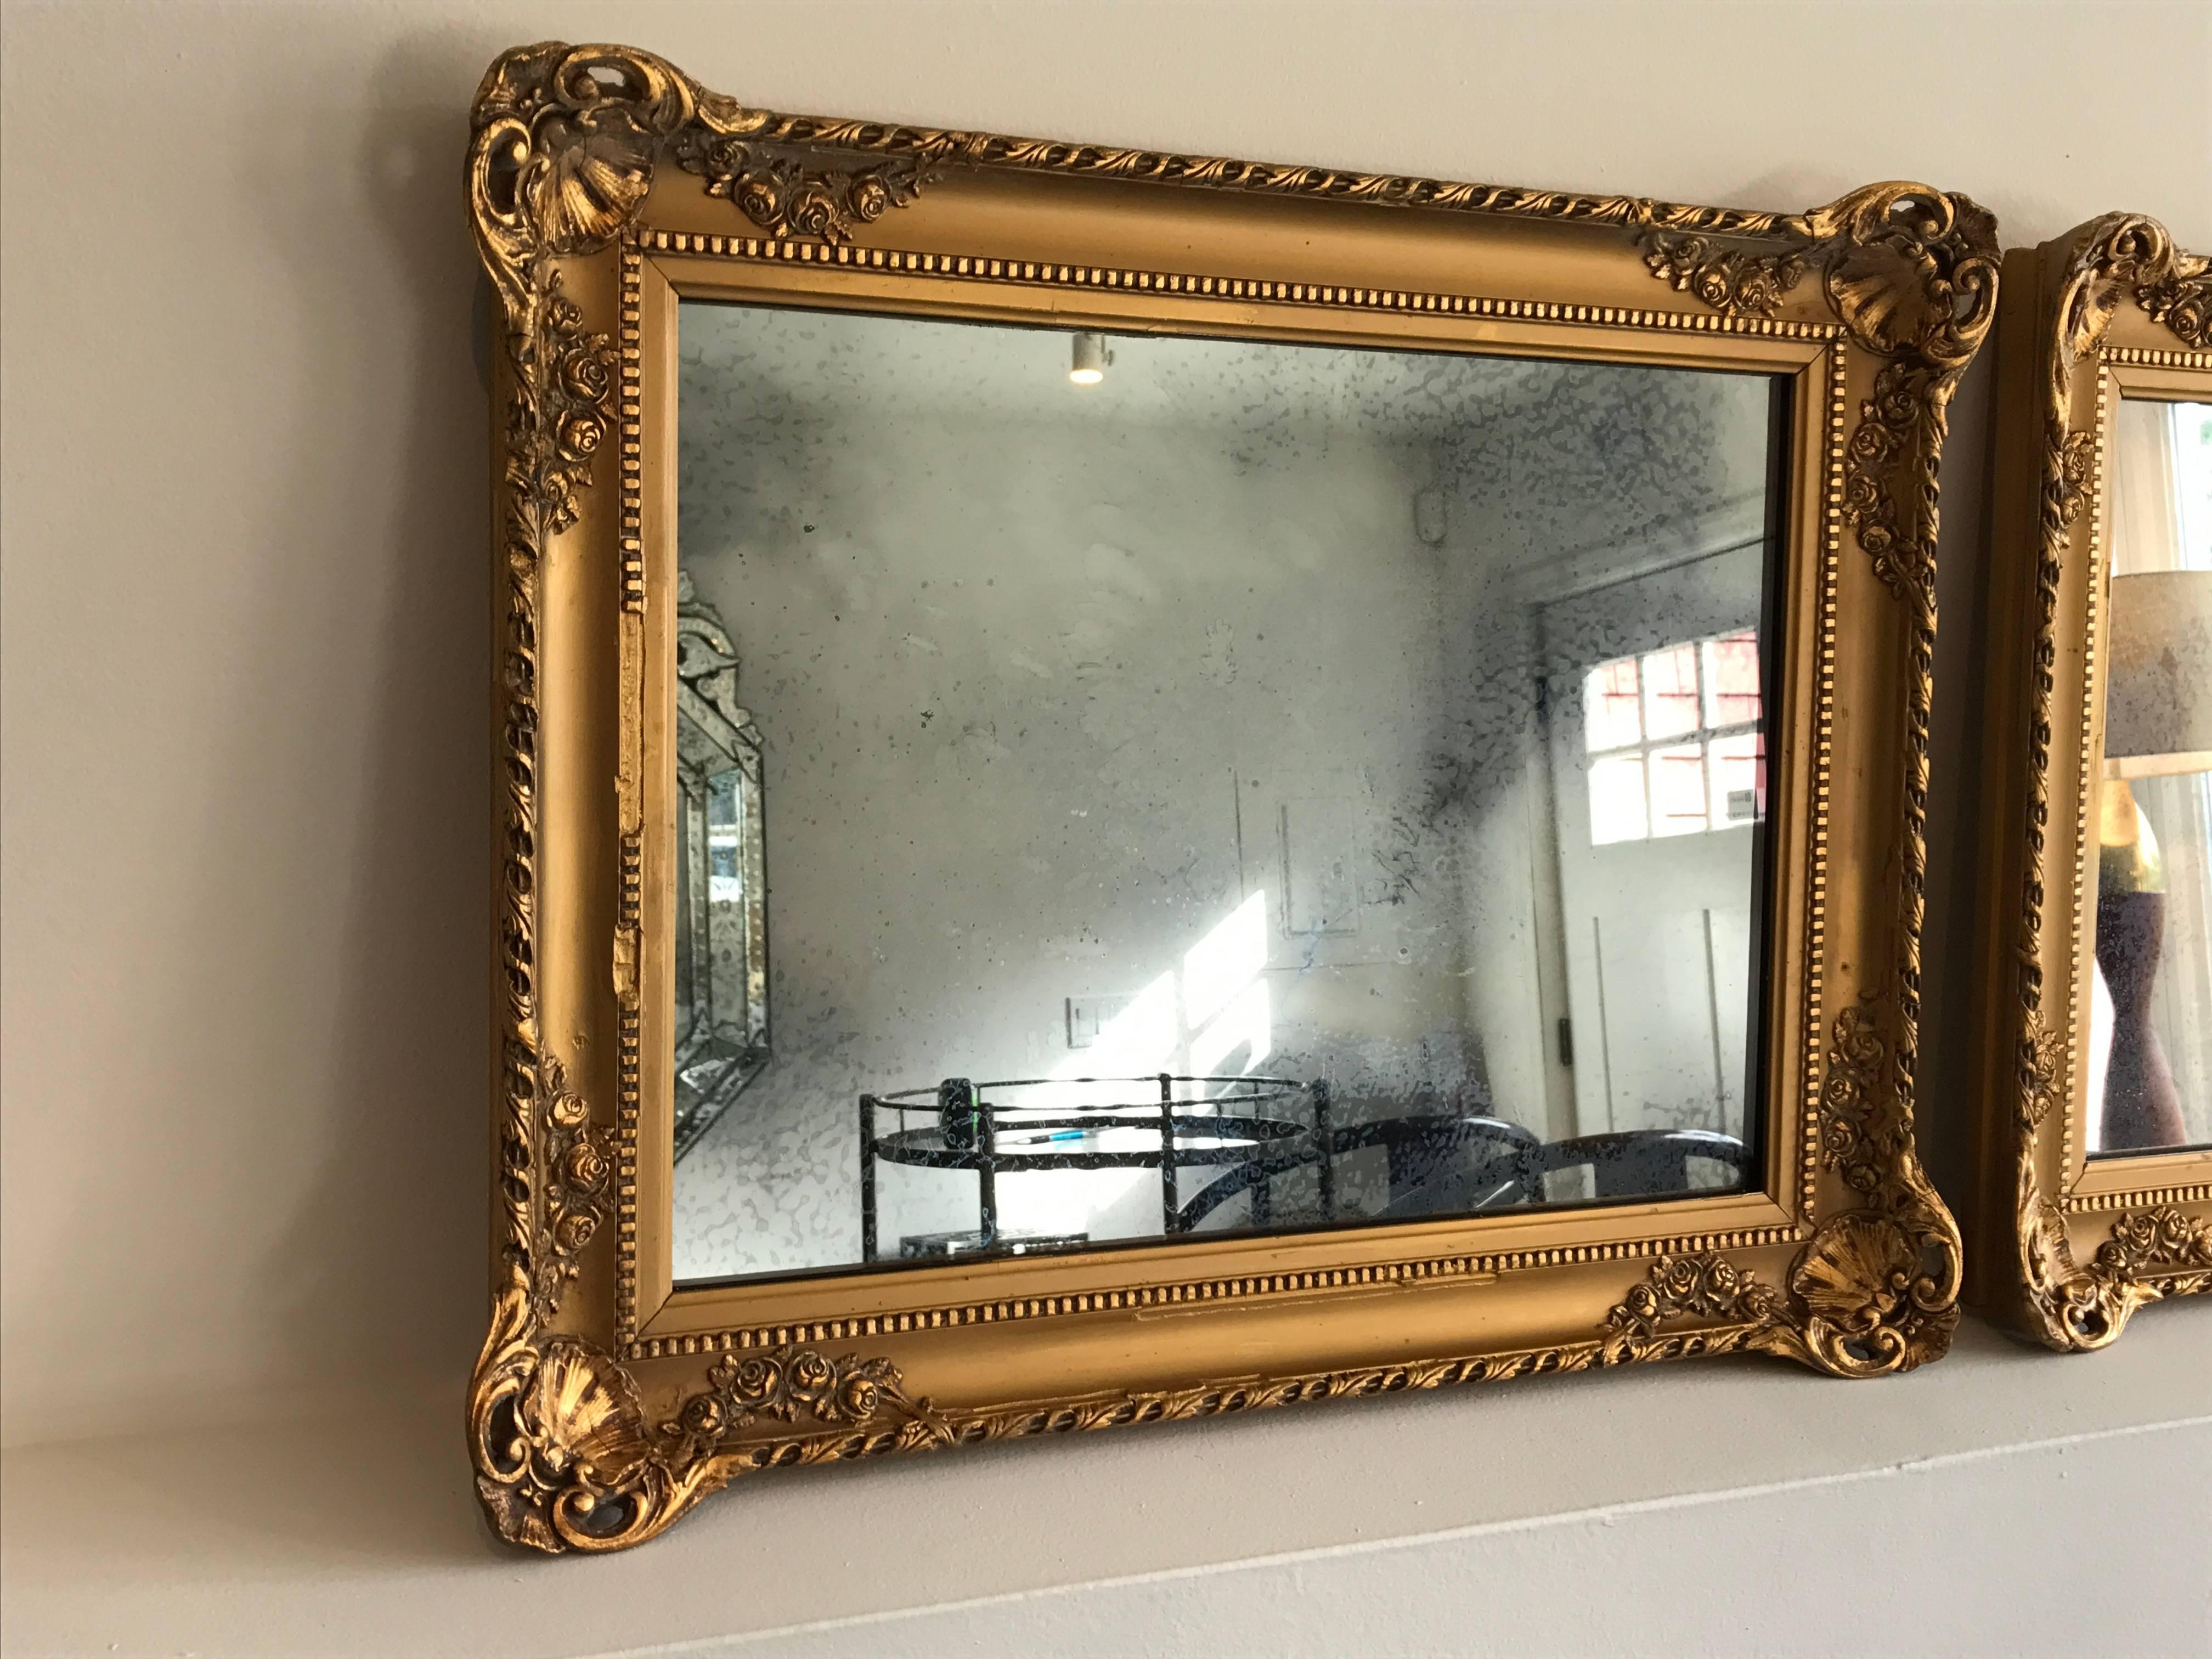 Very elegant pair of Baroque gold gilt plaster and wood framed mirrors. Smokey antiqued mirror. Can be presented horizontally or vertically. Minor loss, please see photos, professionally touched up.